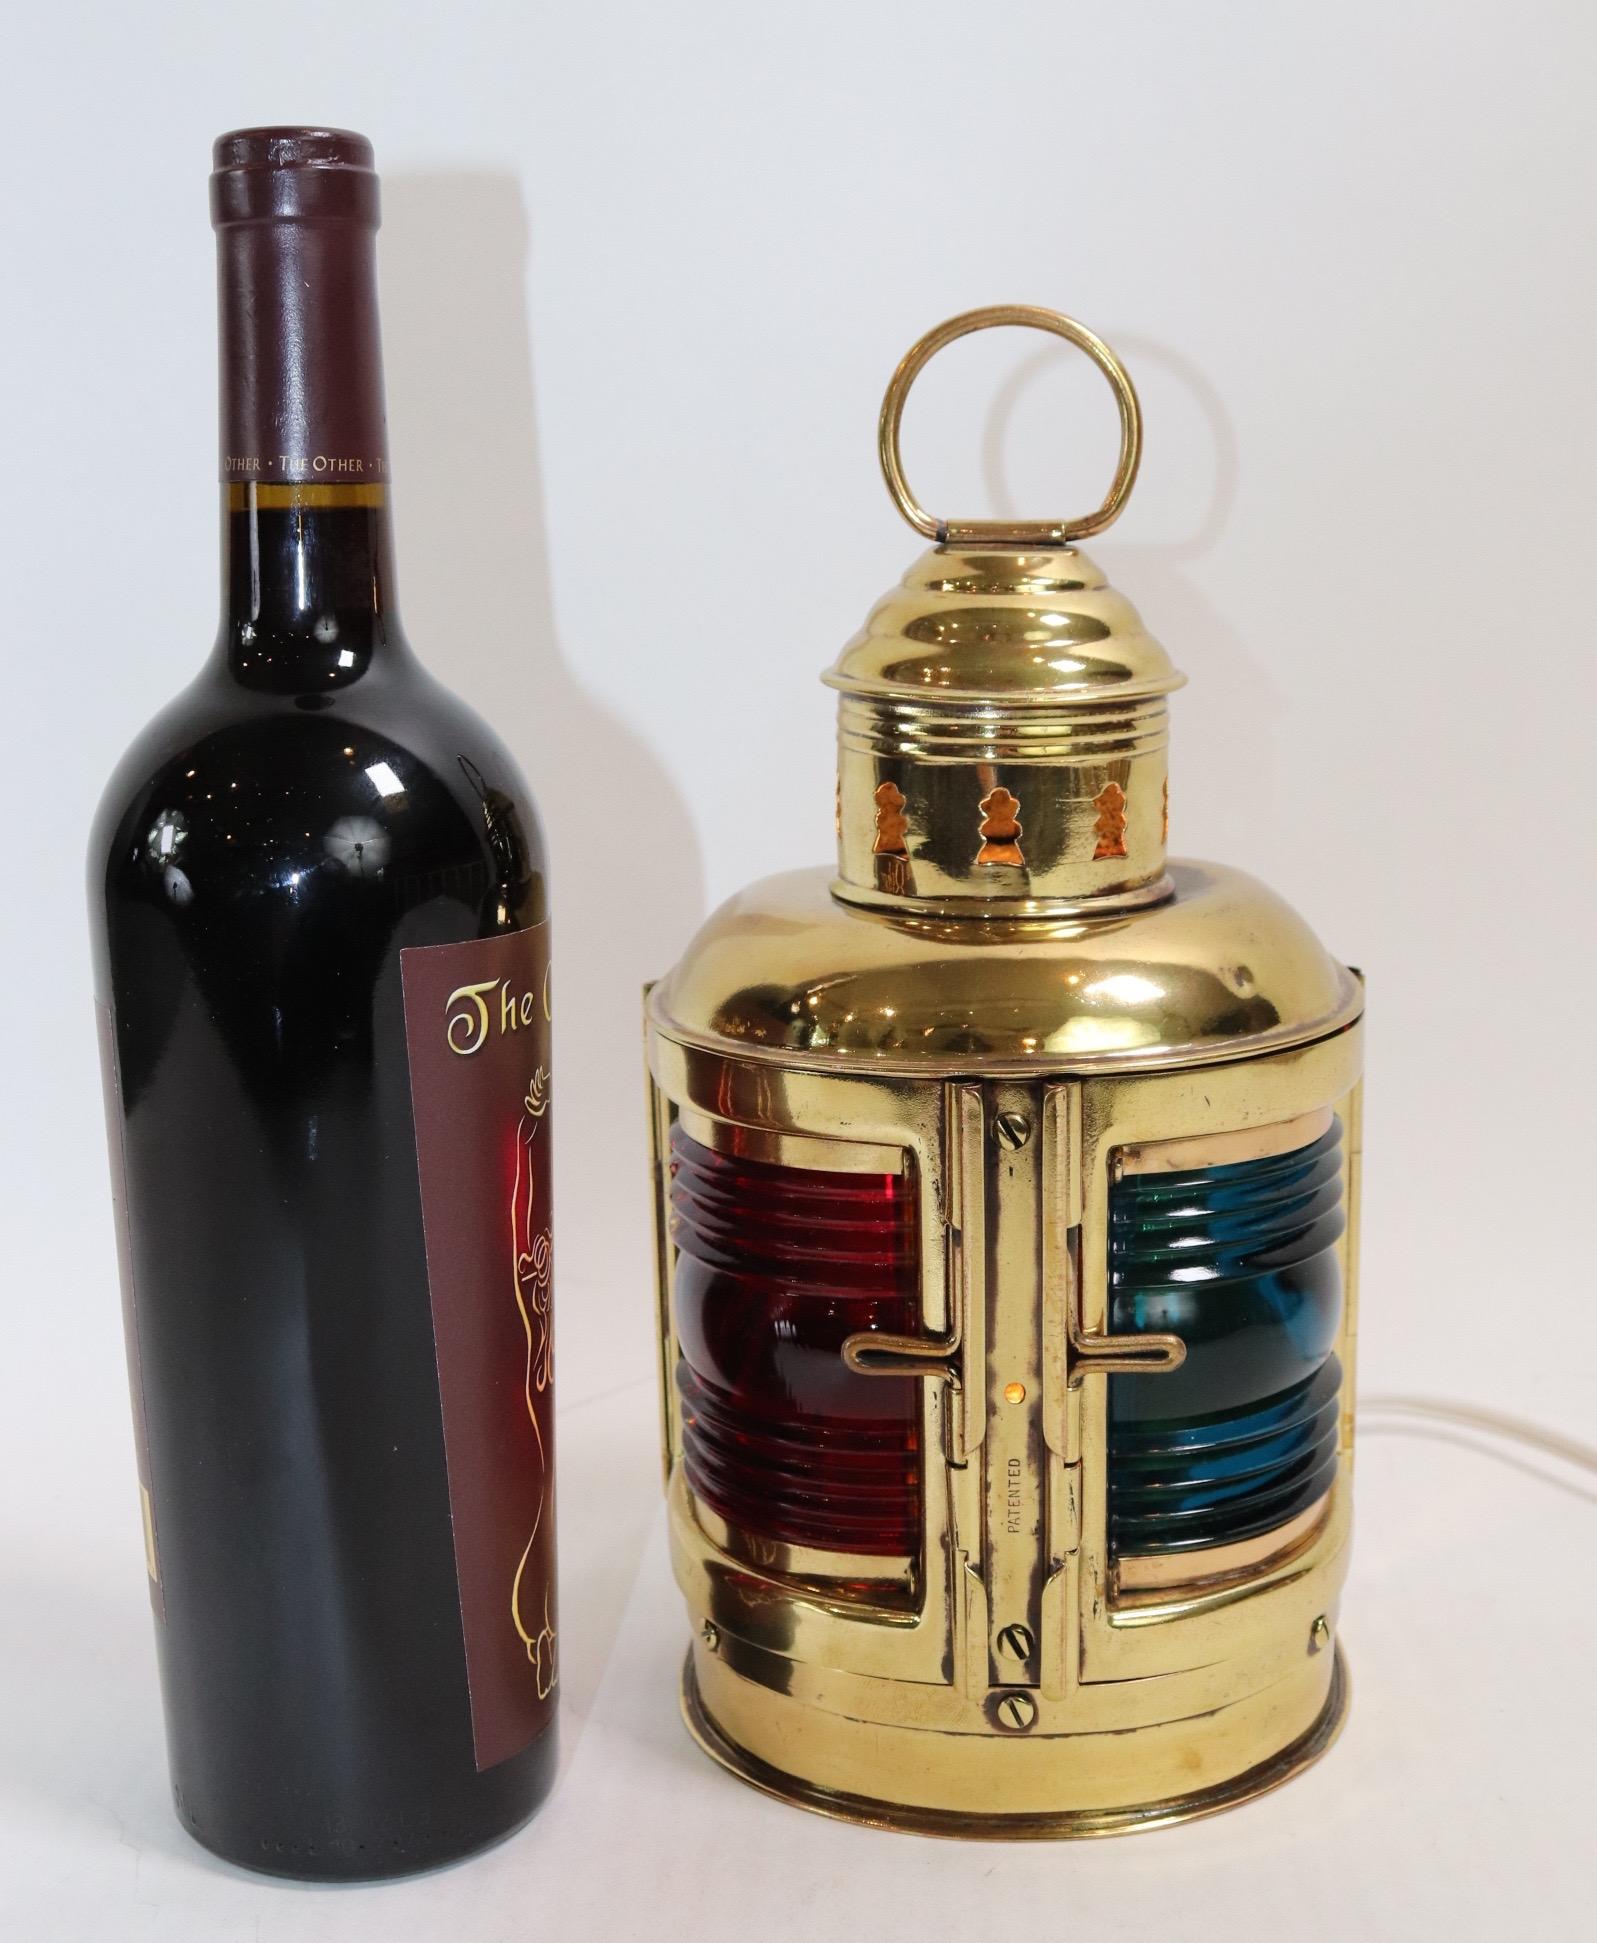 Solid brass port and starboard boat lantern by Perko. The red port lantern has a vertical crack. Lantern is mounted to a wood base and is electrified for home display. Weight is 4 pounds.